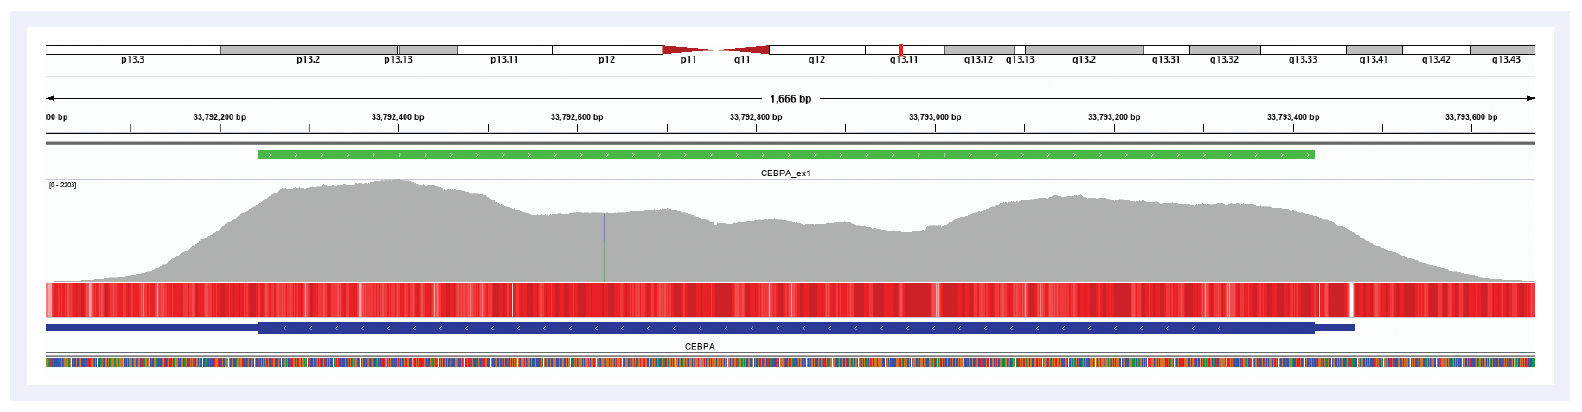 Figure 1: Illustration of the excellent coverage uniformity of the CEBPA gene. Depth of coverage per base (grey). Targeted region (green). Gene coding region as defined by RefSeq (blue). GC percentage (red).